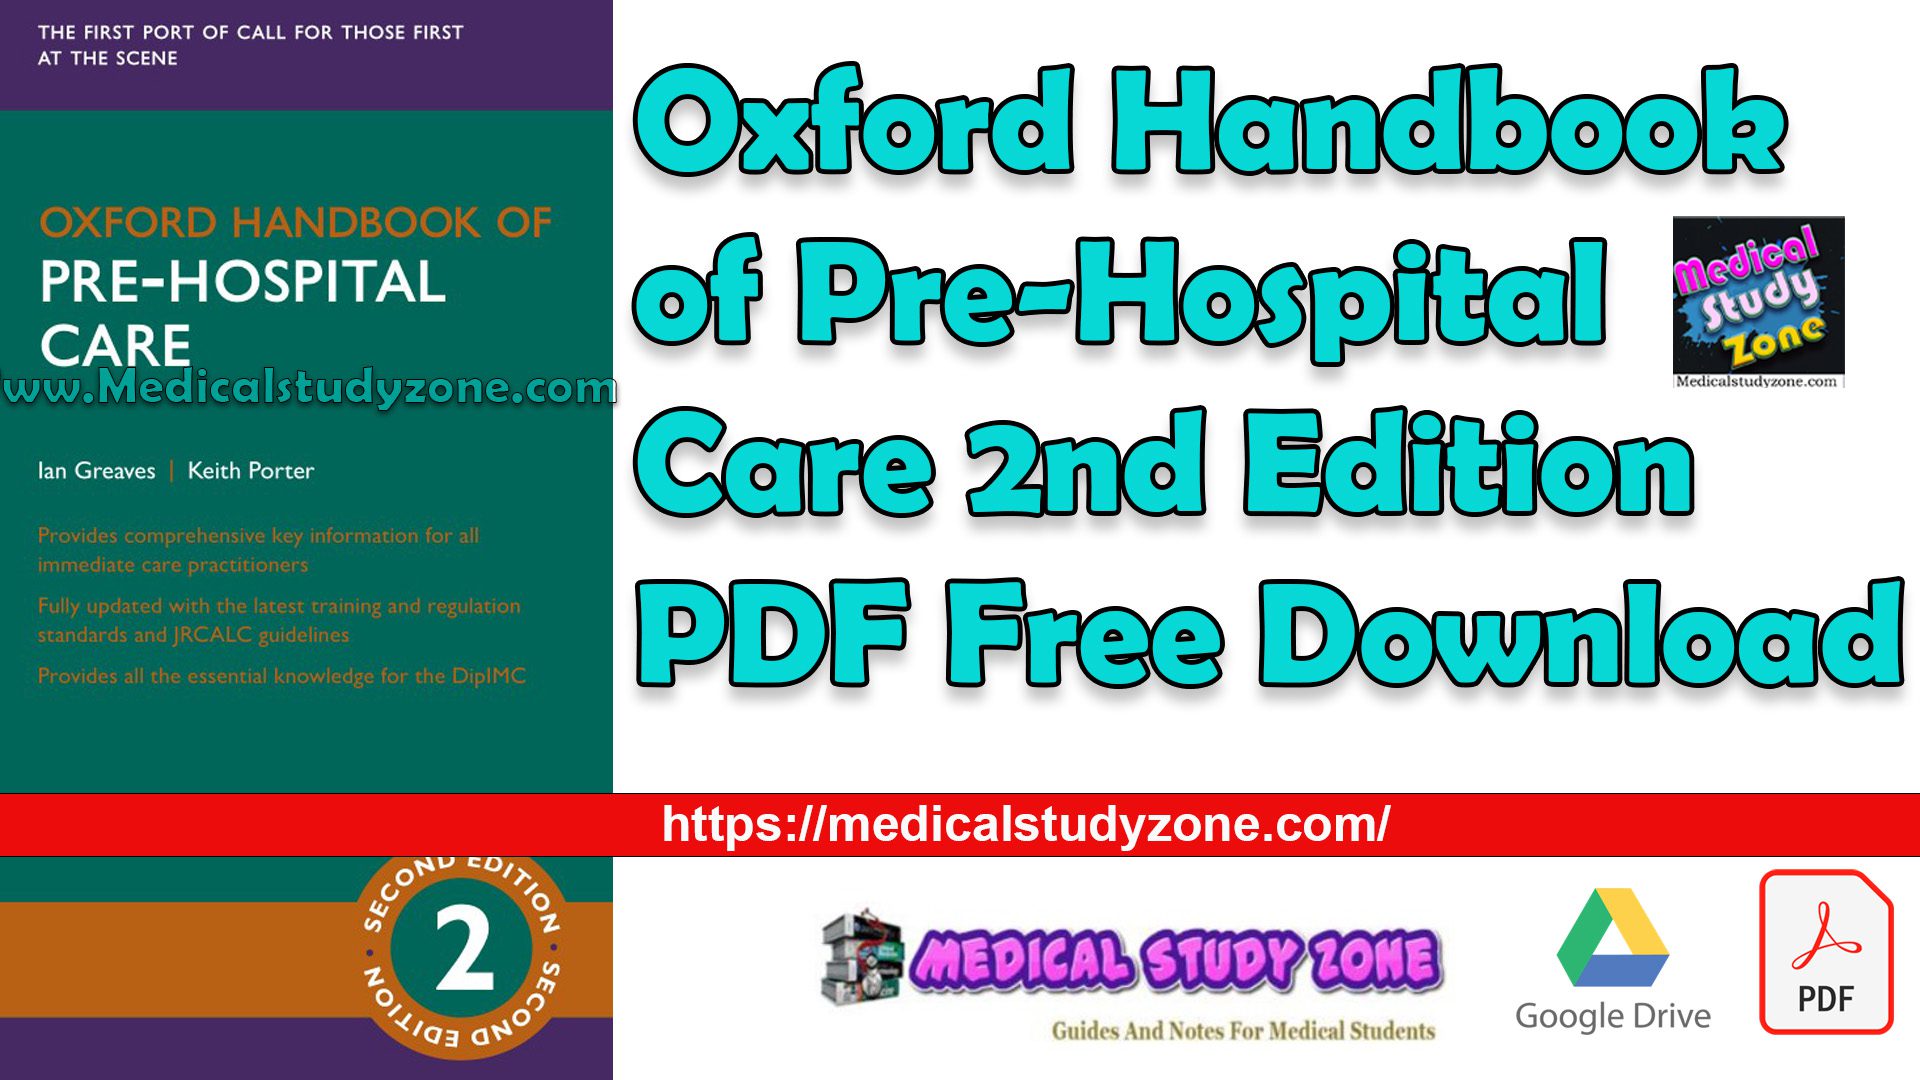 Oxford Handbook of Pre-Hospital Care 2nd Edition PDF Free Download